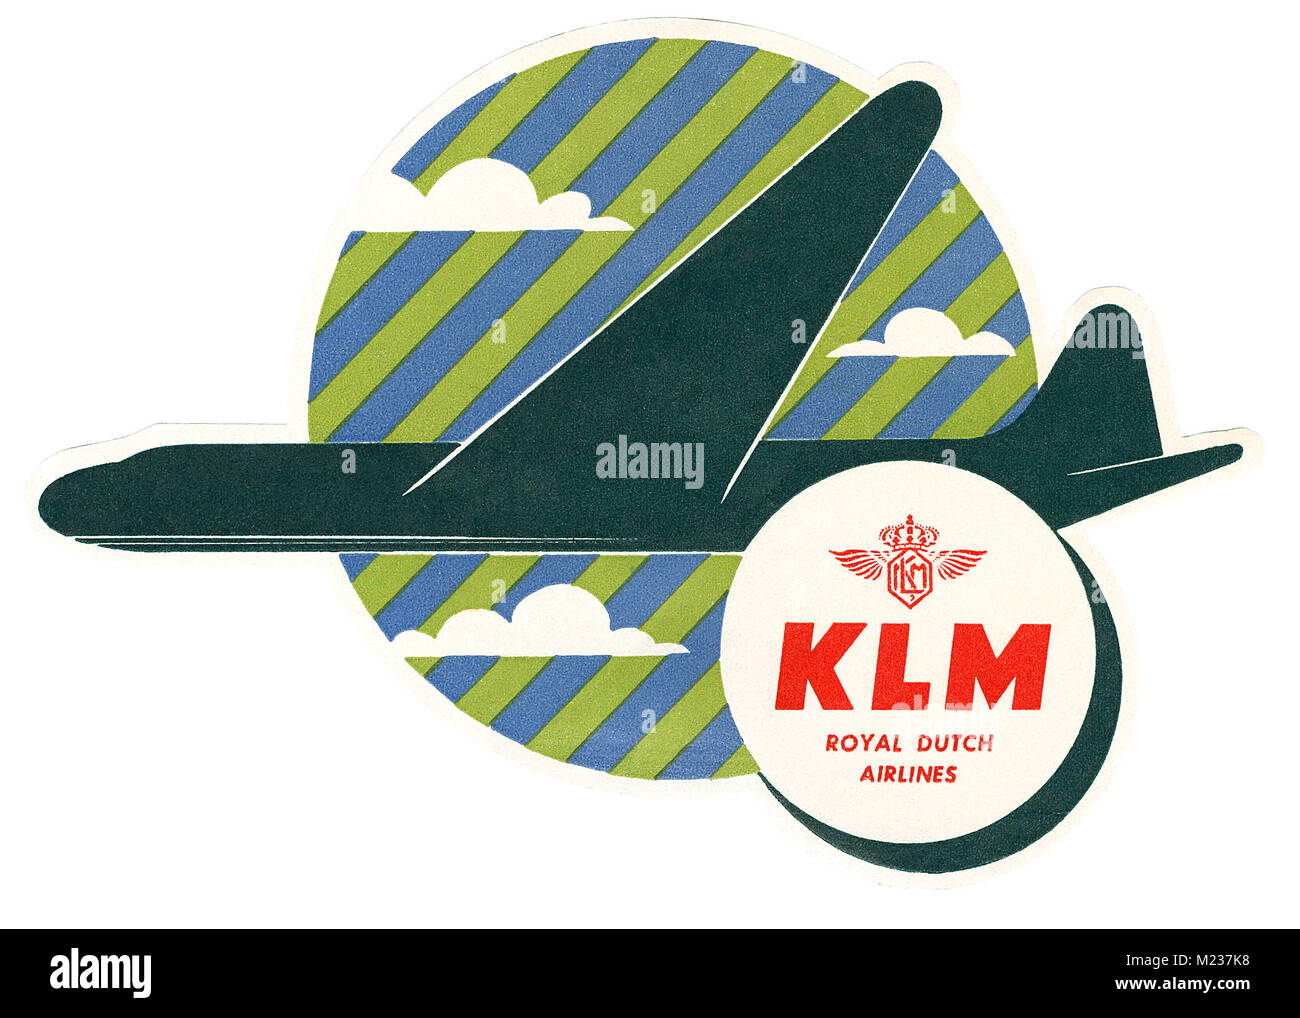 Vintage KLM Royal Dutch Airlines luggage label. Stock Photo